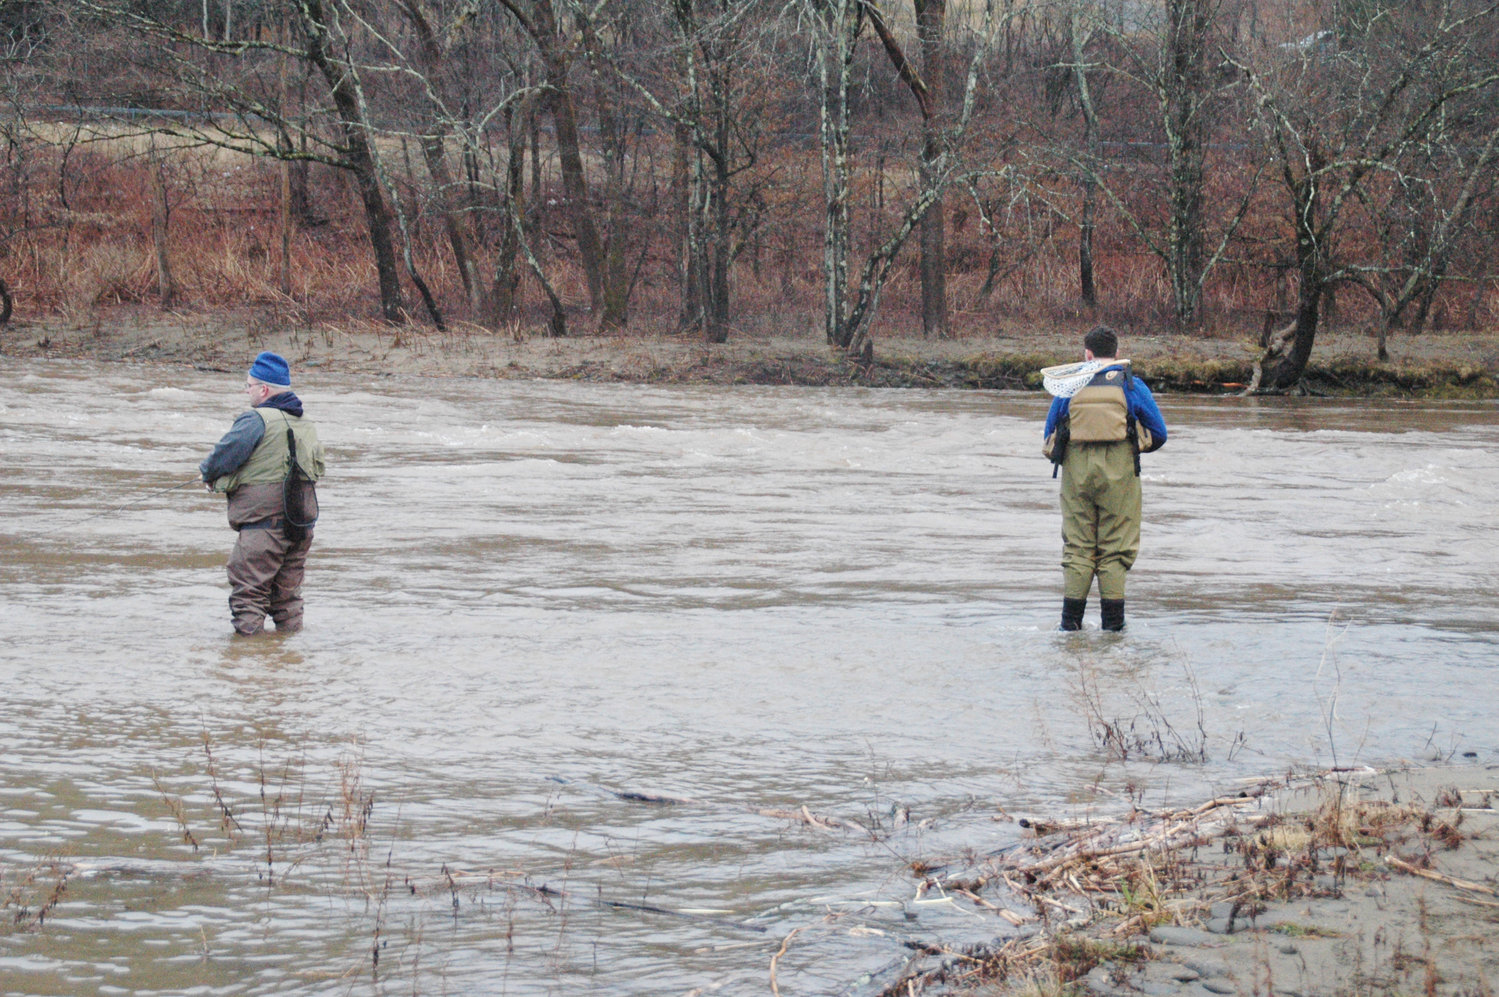 From the first cast of the season until the last, the fishing in Sullivan County draws people from all over the world. With DEC Free Fishing Days, it is easy to get out and see why so many anglers love these waters.